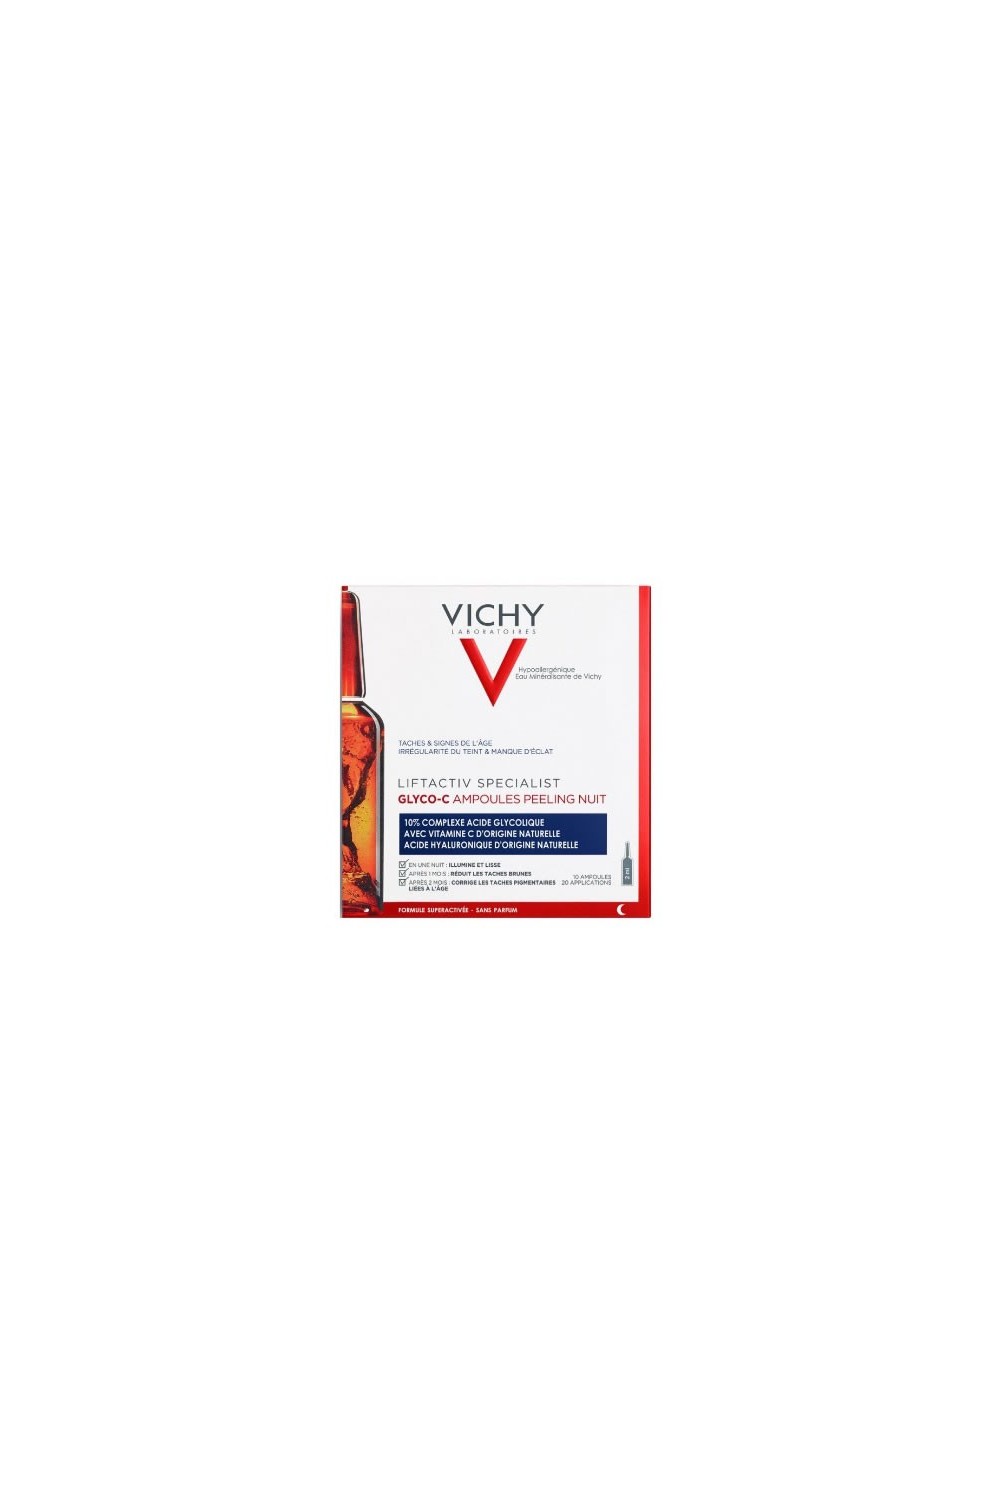 Vichy Liftactiv Specialist Glyco-C Night Peeling 10 Ampoules